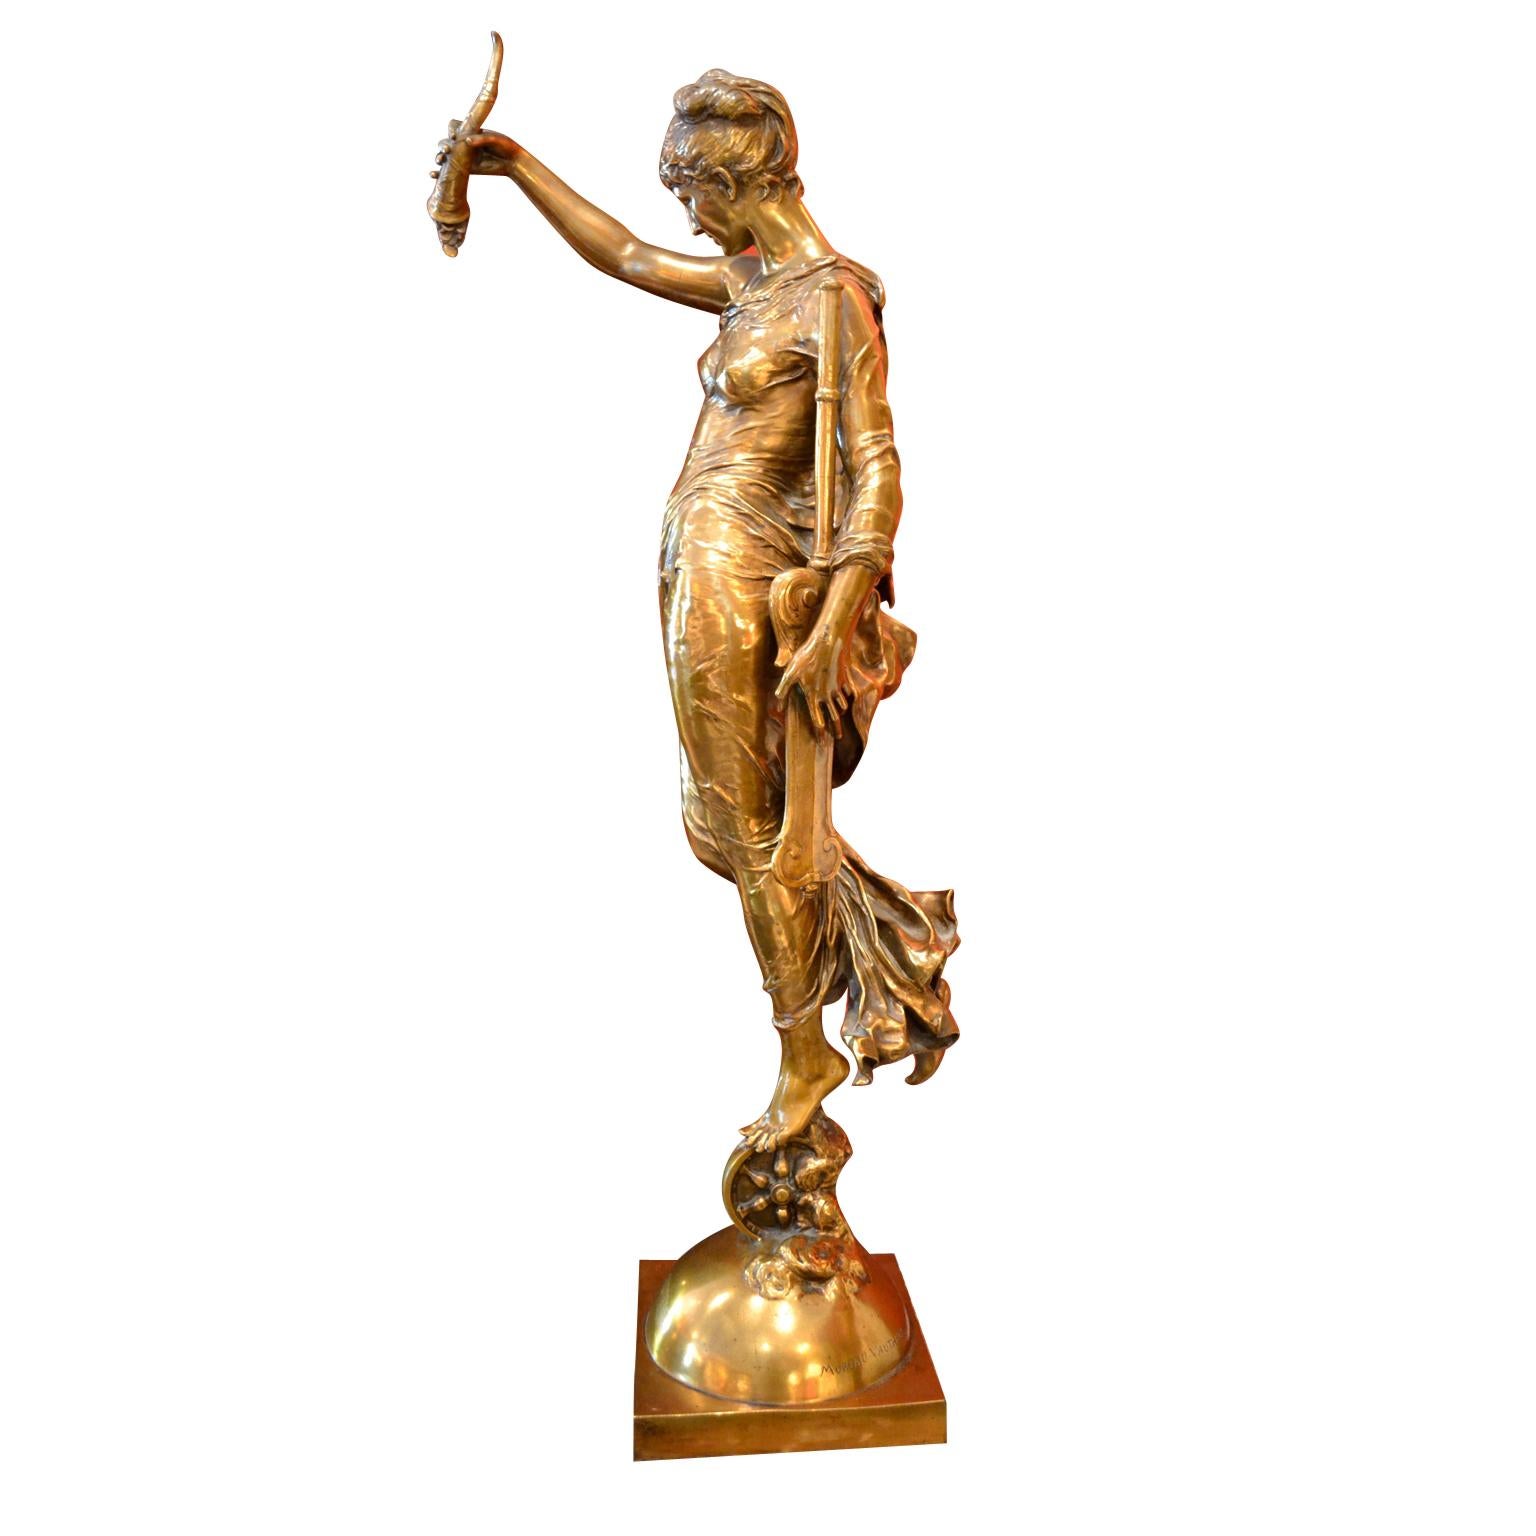 French Gilt Bronze Statue Titled “La Fortune” by Augustin Moreau-Vauthier